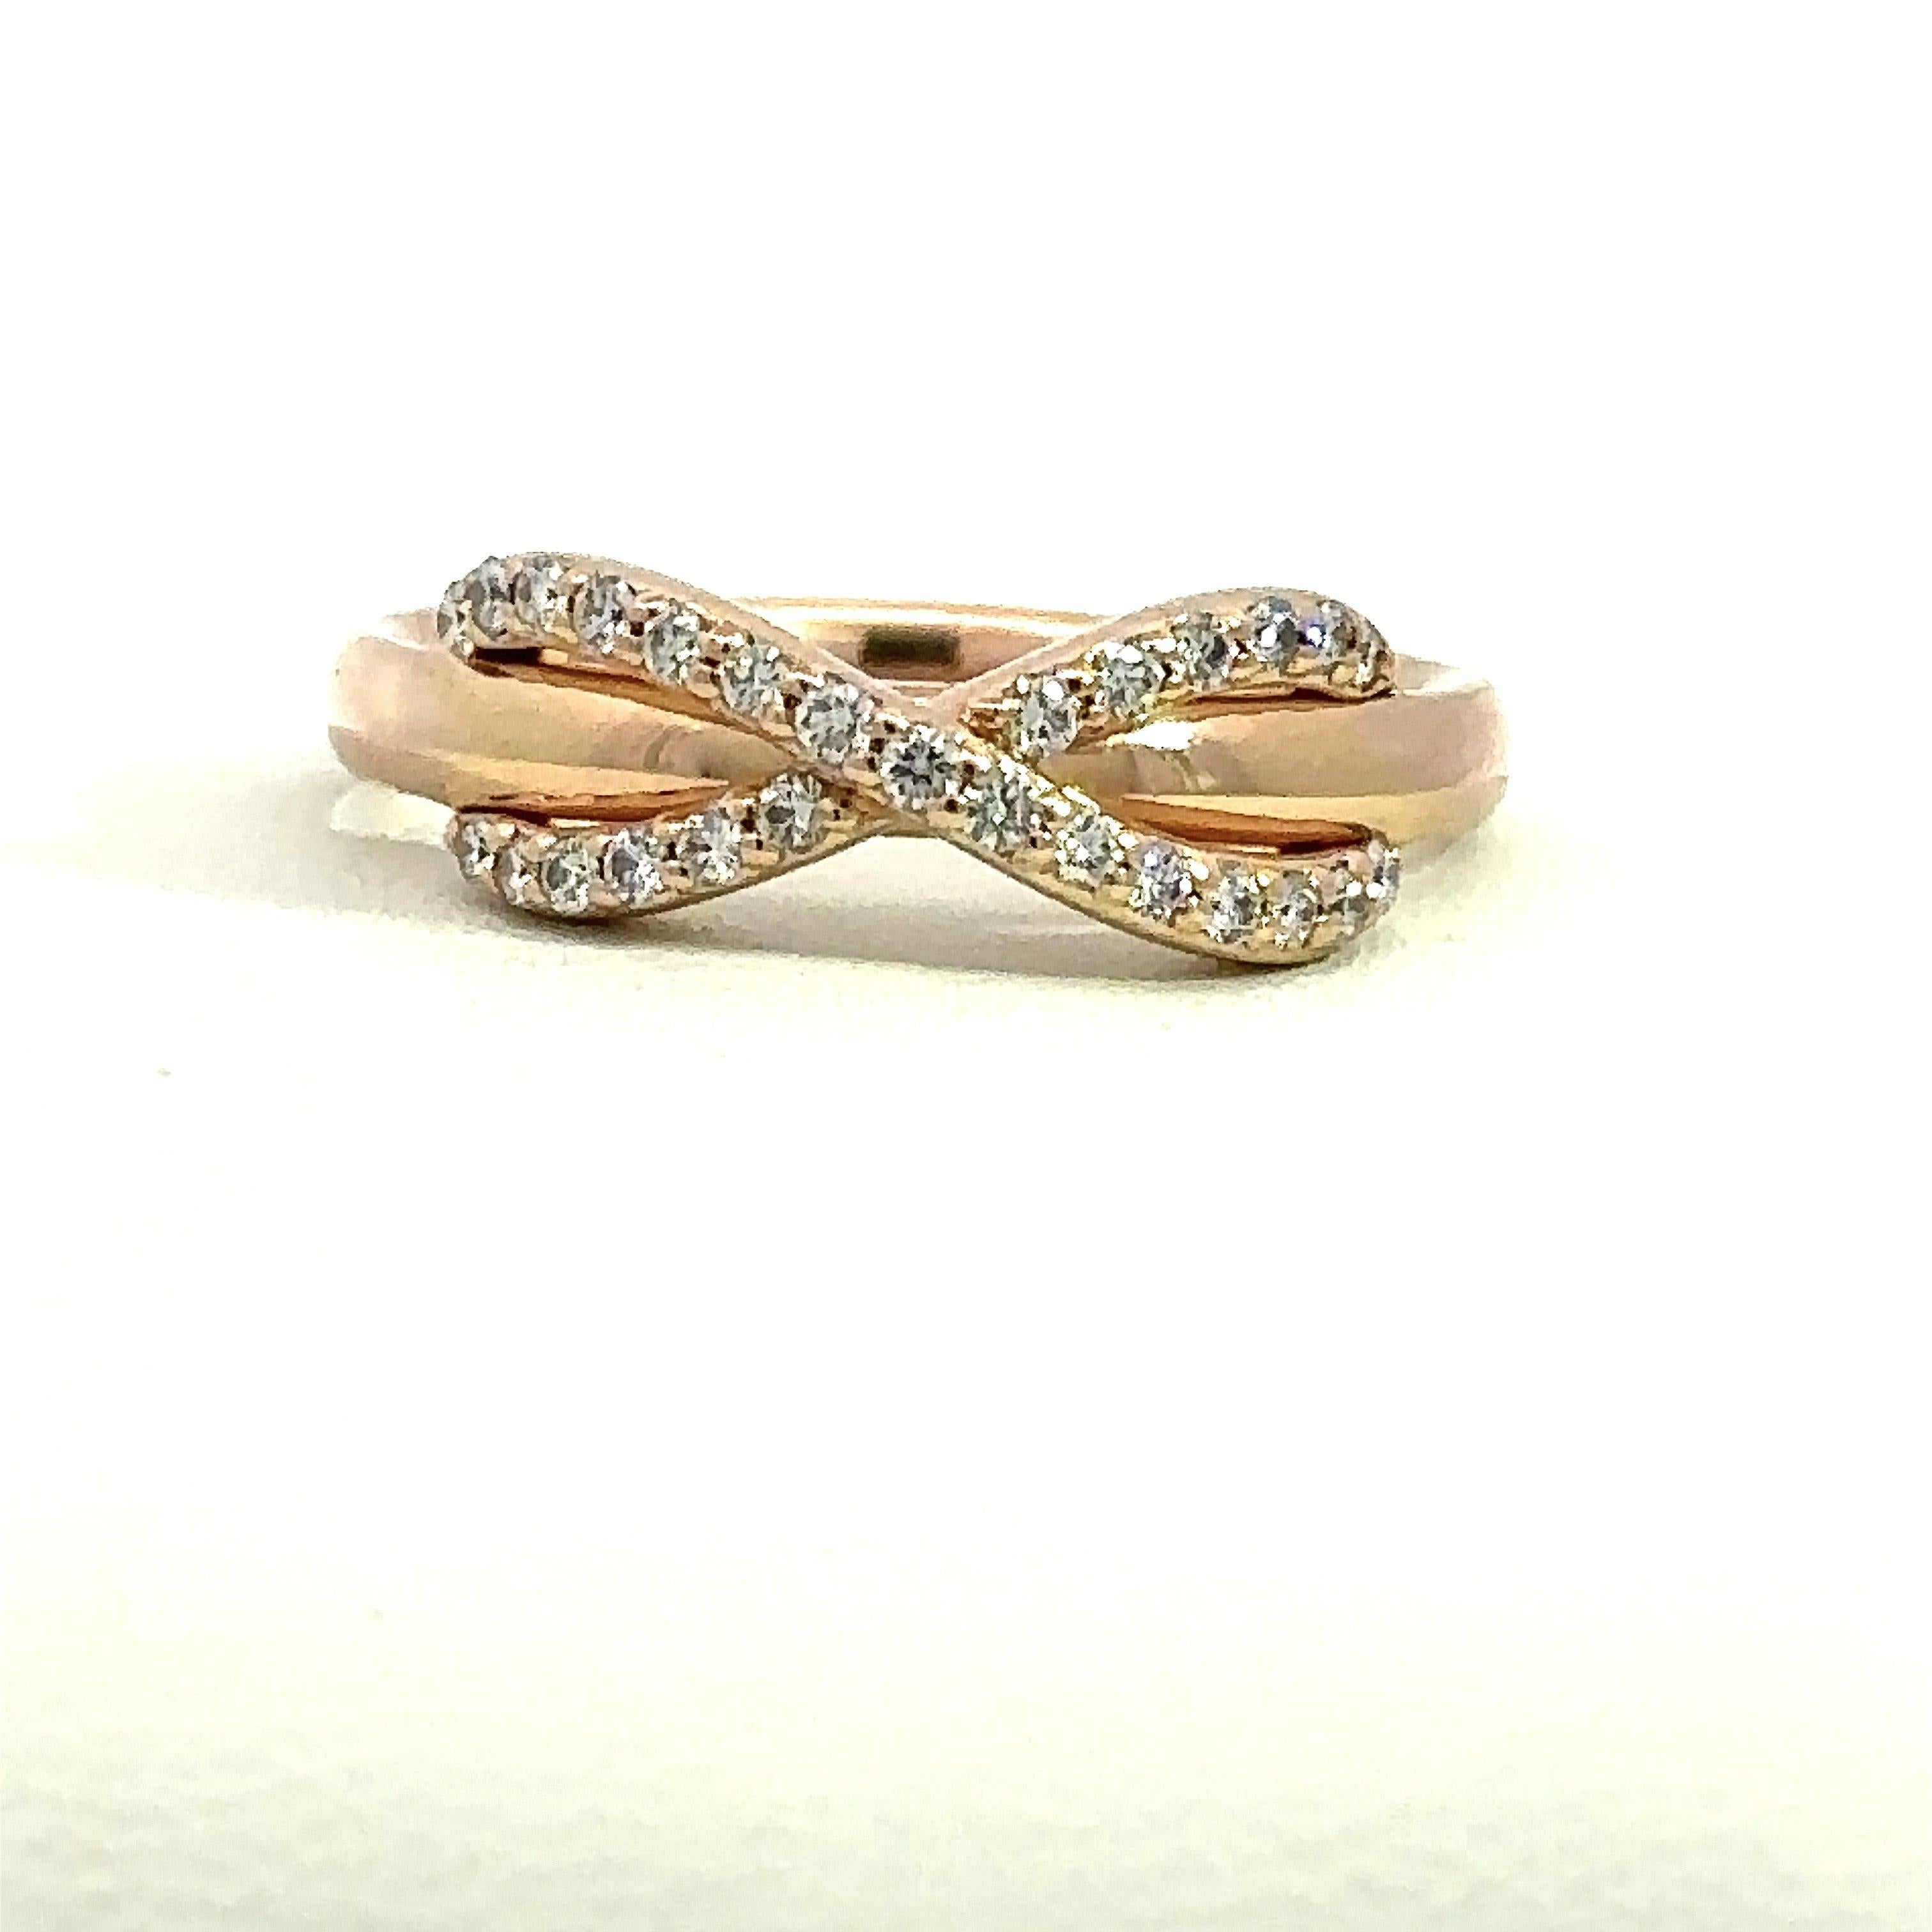 Tiffany & Co. Diamond Infinity Ring in 18KT rose gold with twenty-seven diamonds that weigh approximately .16CT. The ring is stamped T&Co. AU750 Italy. The ring measures 5.7mm at its widest point and tapers to 2.3mm. The ring is a size 5 and can be